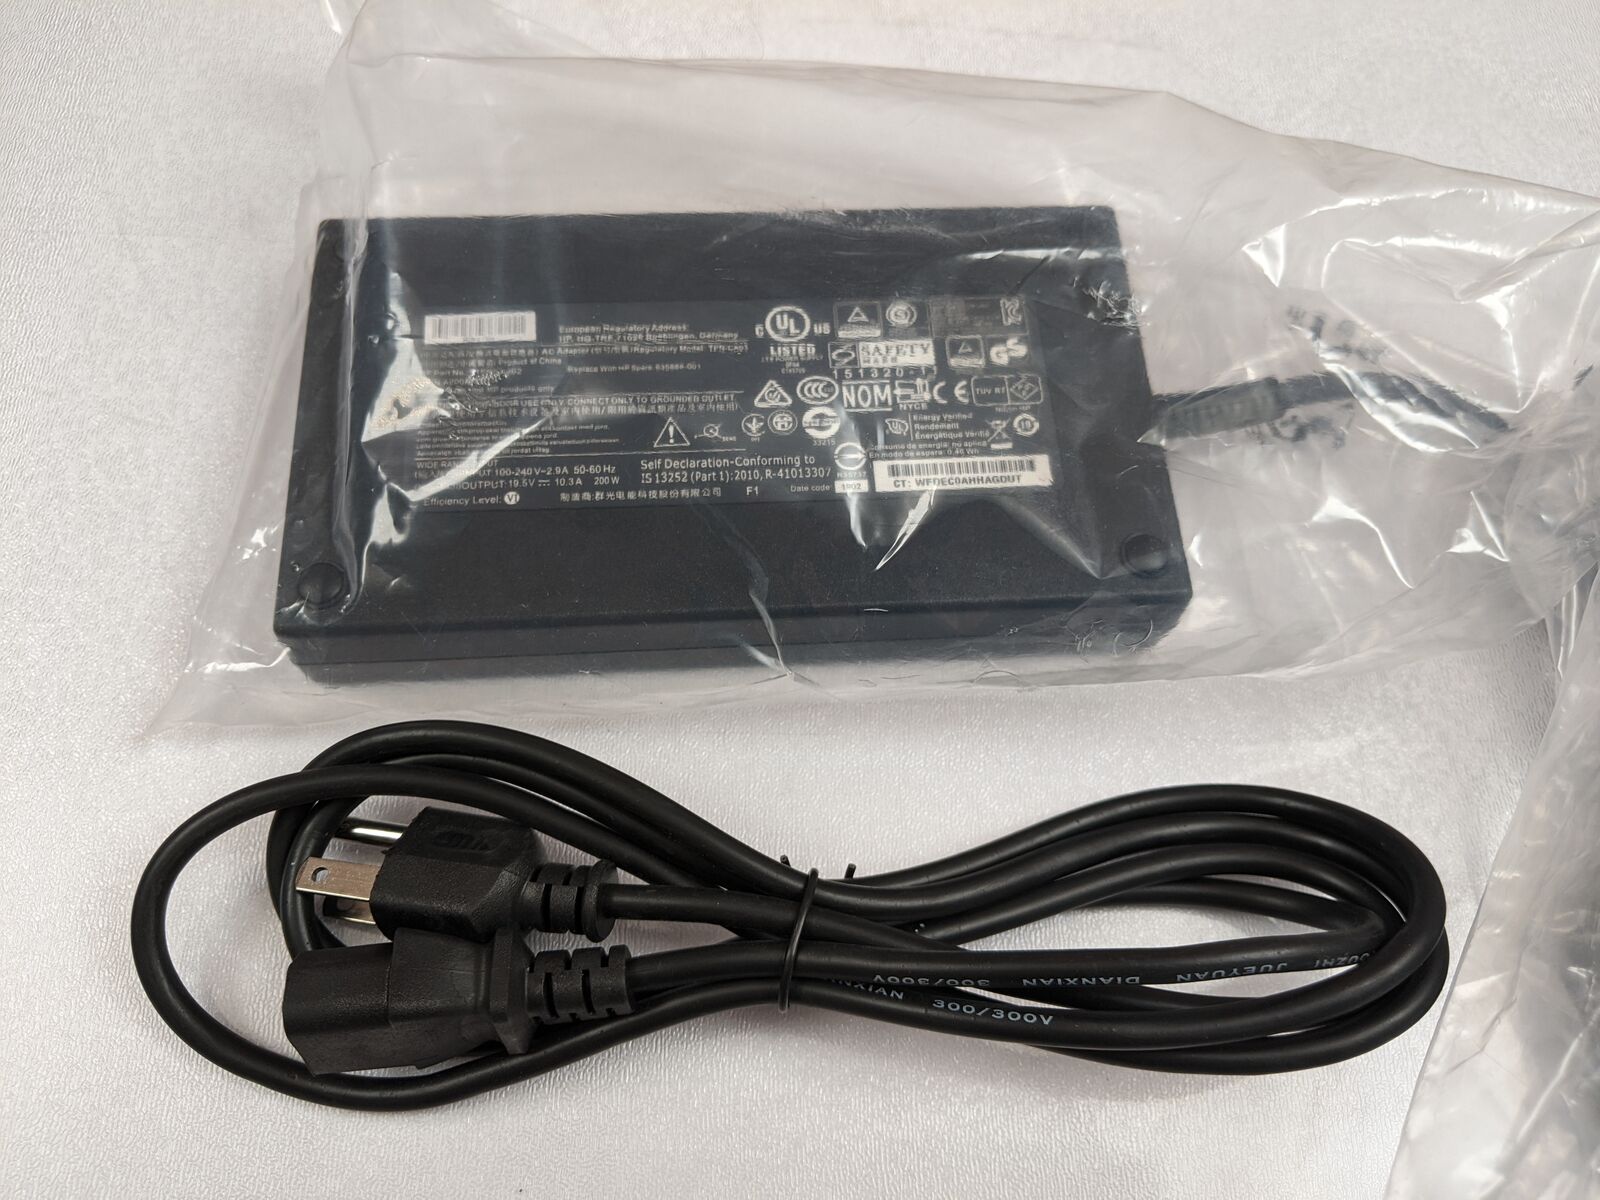 NEW 200W HP 815680-001 835888-003 Adapter19.5V 200W AC Adapter ZBook 17 G3 G4 - Click Image to Close